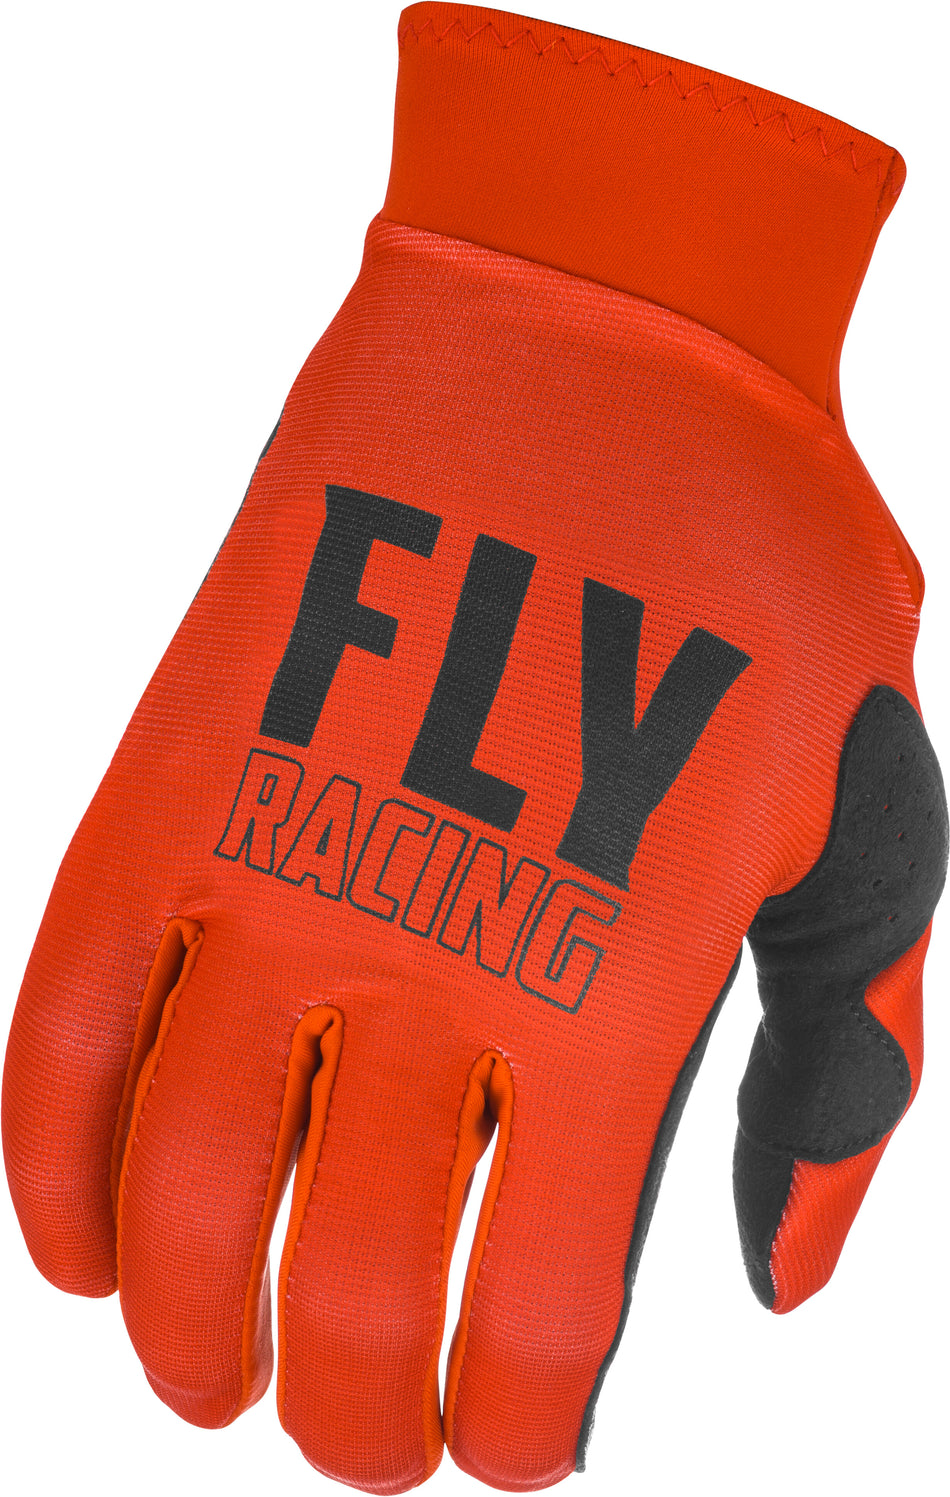 FLY RACING Pro Lite Gloves Red/Black Sz 11 374-85211